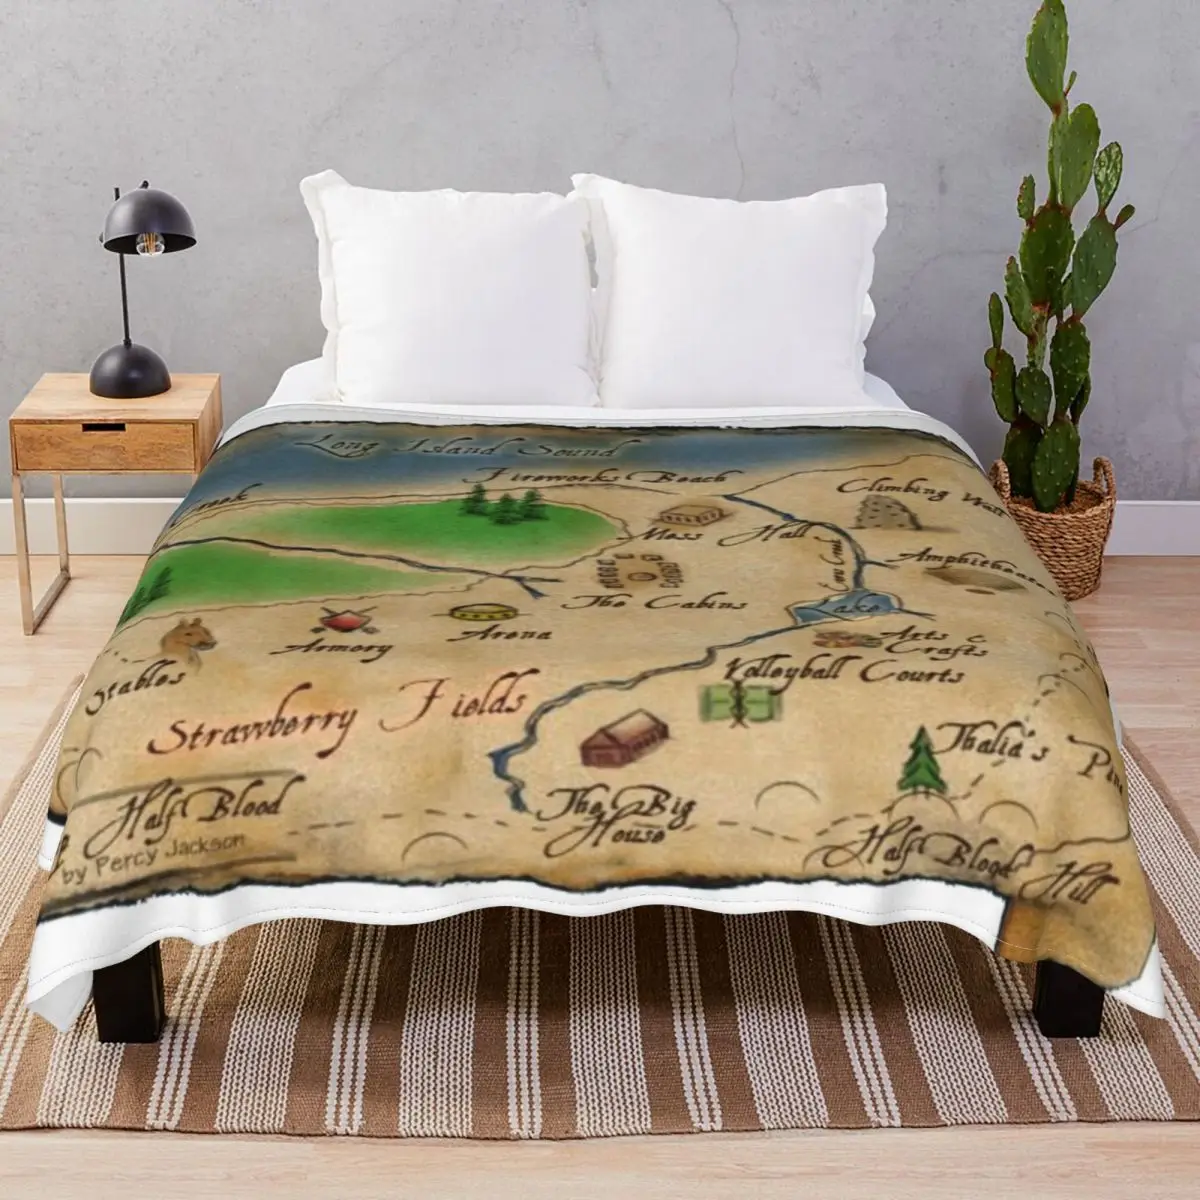 

Camp Half-Blood Map Blankets Fleece Plush Print Breathable Unisex Throw Blanket for Bed Home Couch Travel Cinema